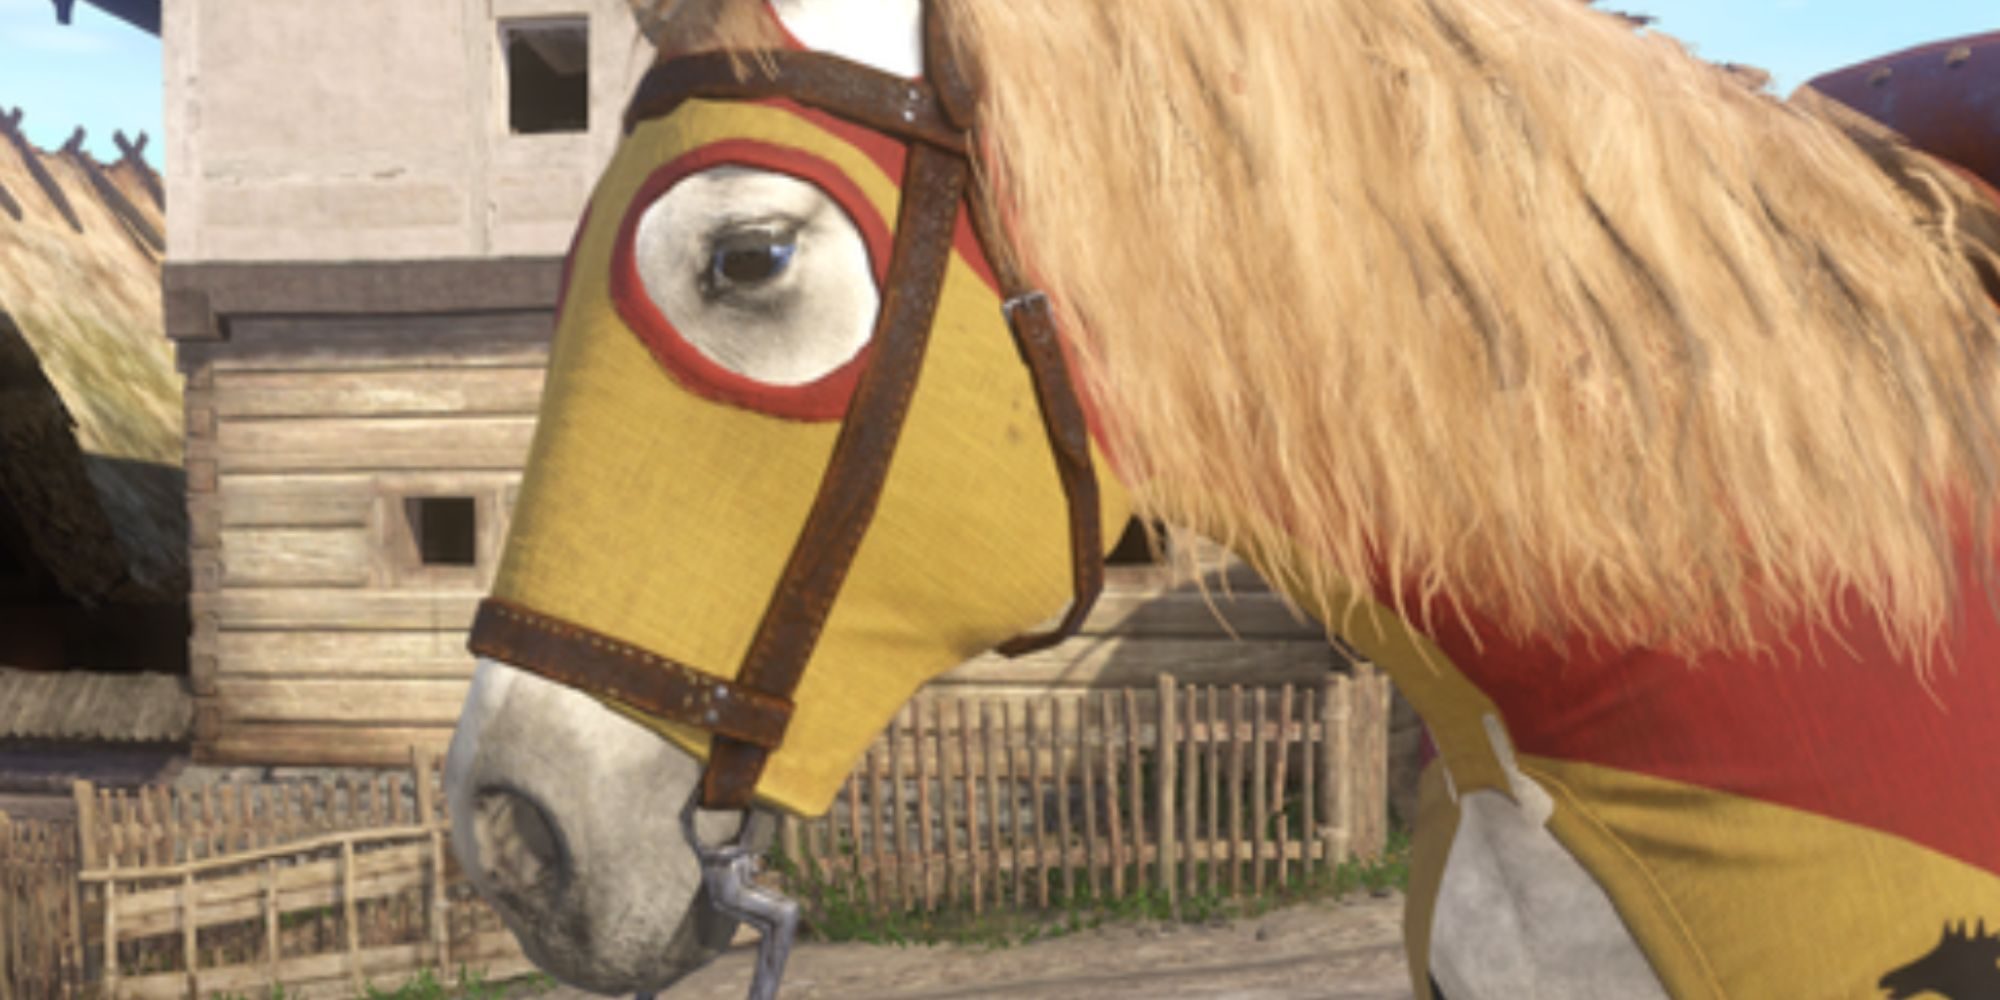 kingdom_come_deliverance_horse_outside_during_the_day-1592622